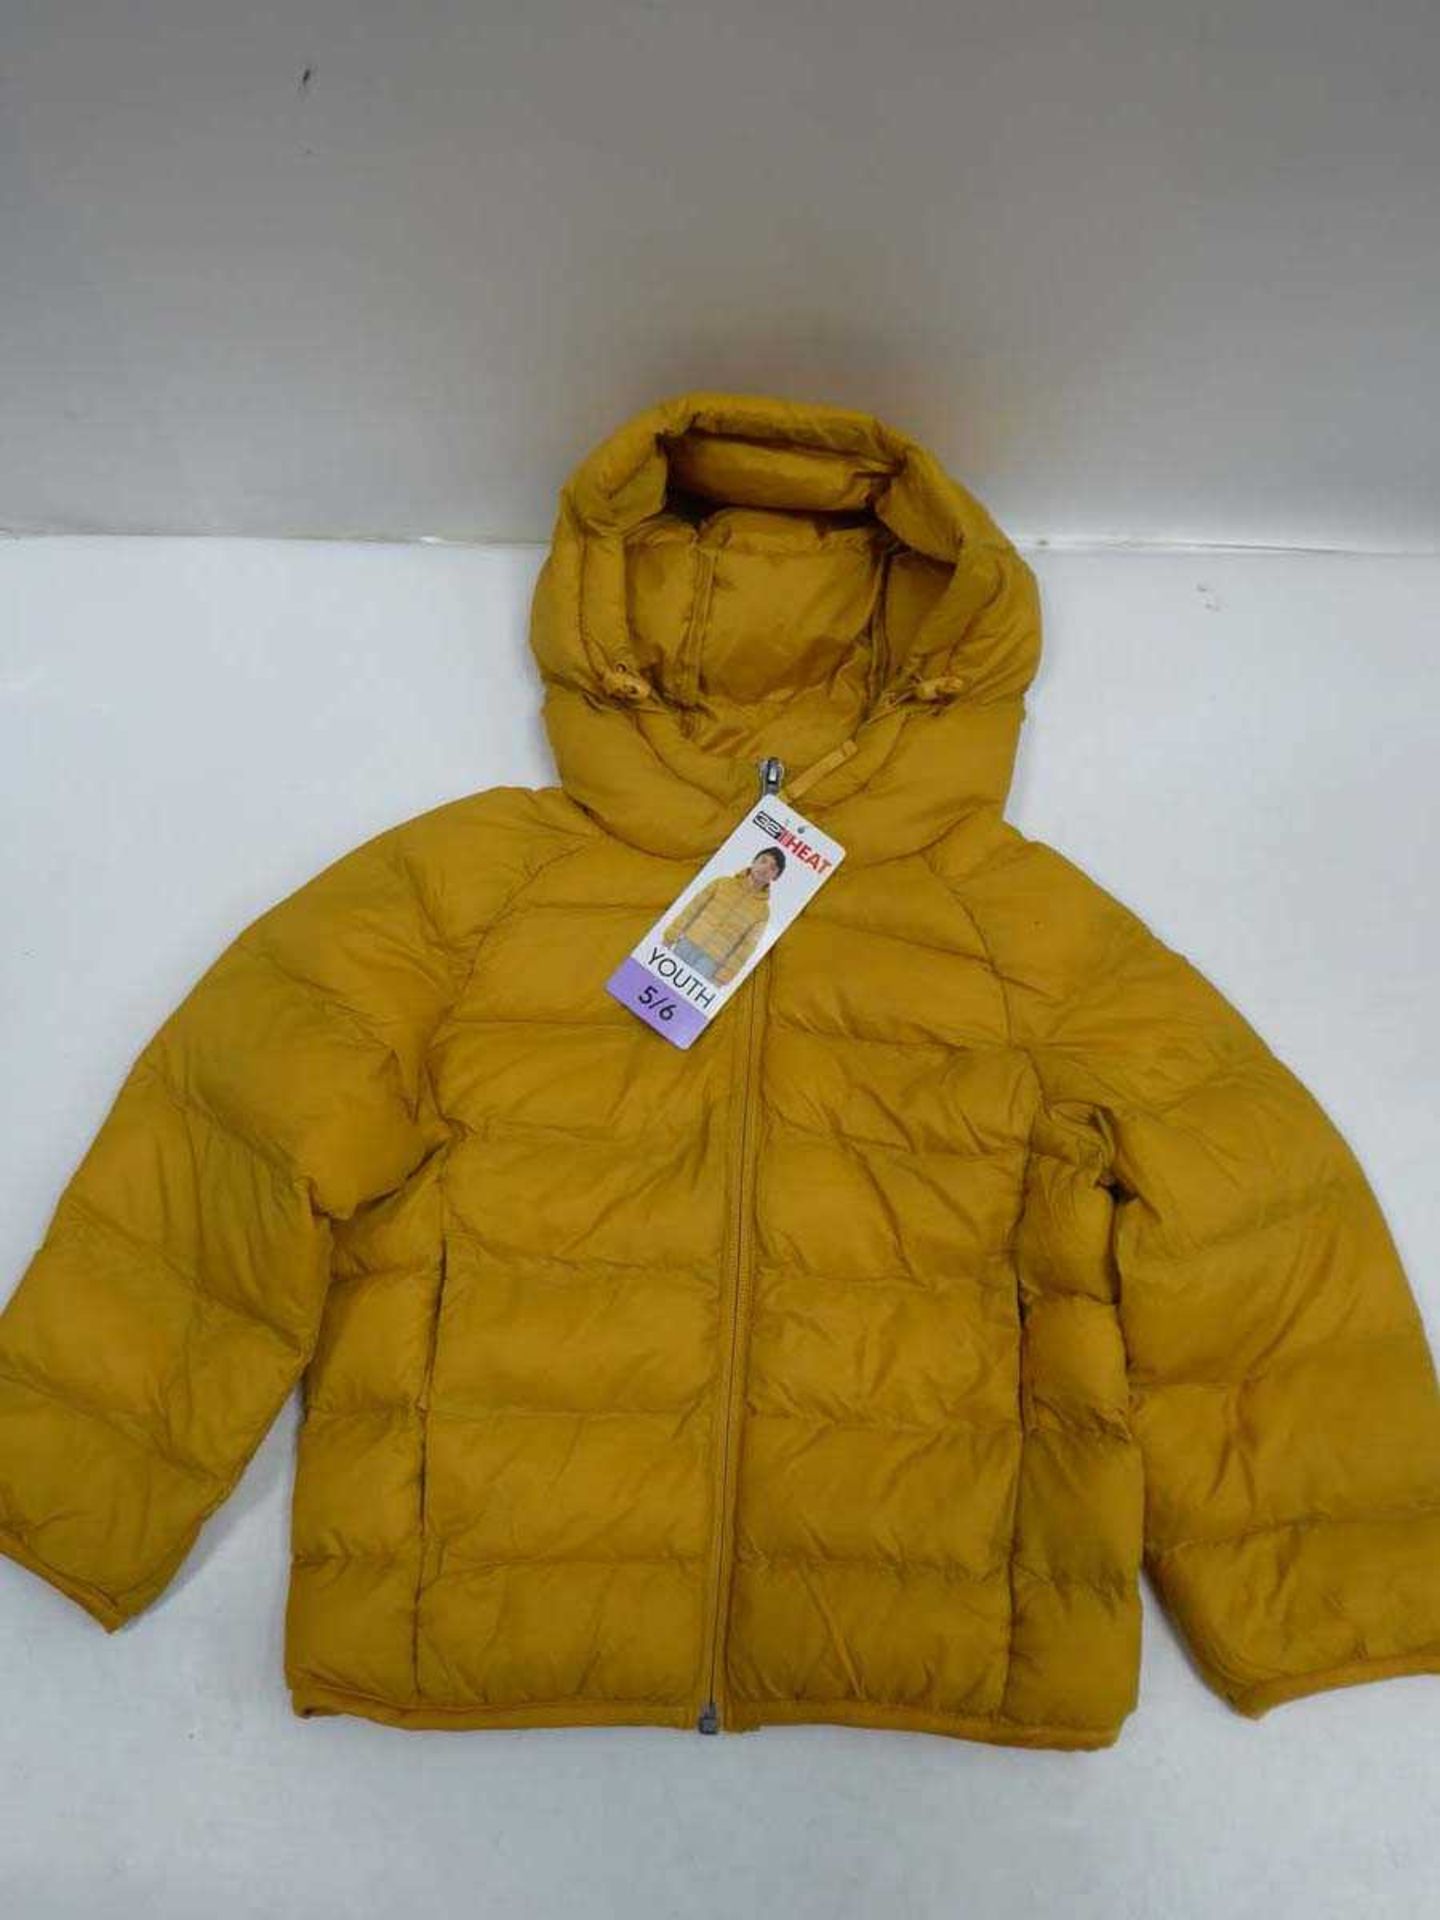 20 kids 32 Degree Heat youth jackets in mixed colours